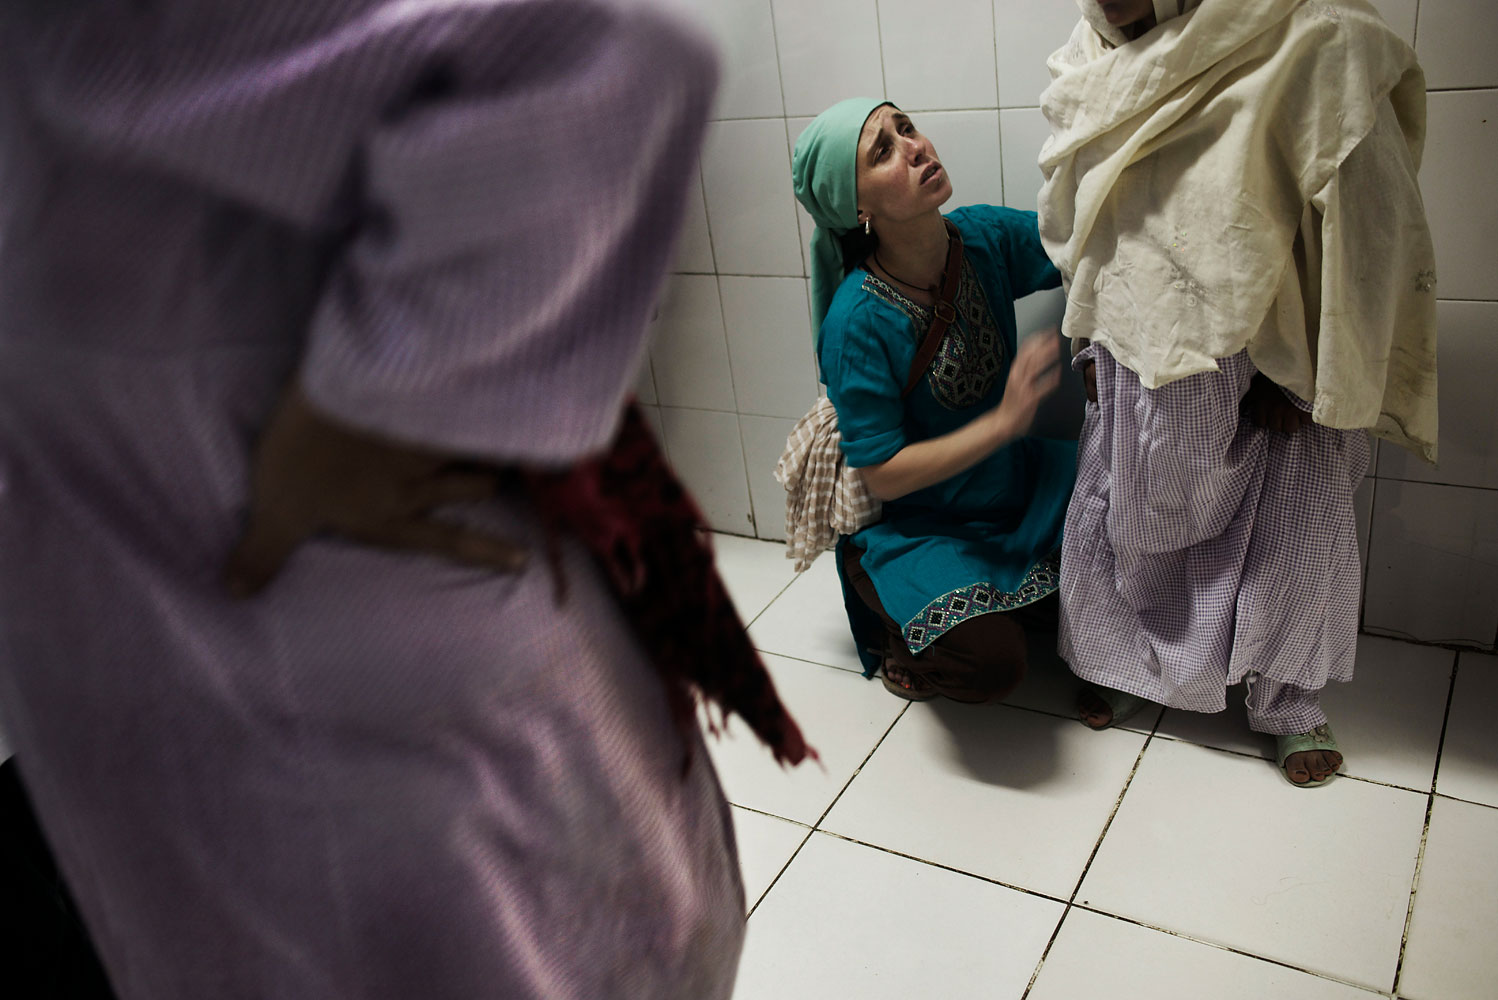 In Kabul, women going through labor are helped by midwives at the Ahmed Shah Baba Hospital, which is known for its maternity care. Midwife Iline Ceelen comforts a woman going through labor who is around 13 years old.  The Ahmed Shah Baba Hospital sees, on average, 900 to 1000 births a month.